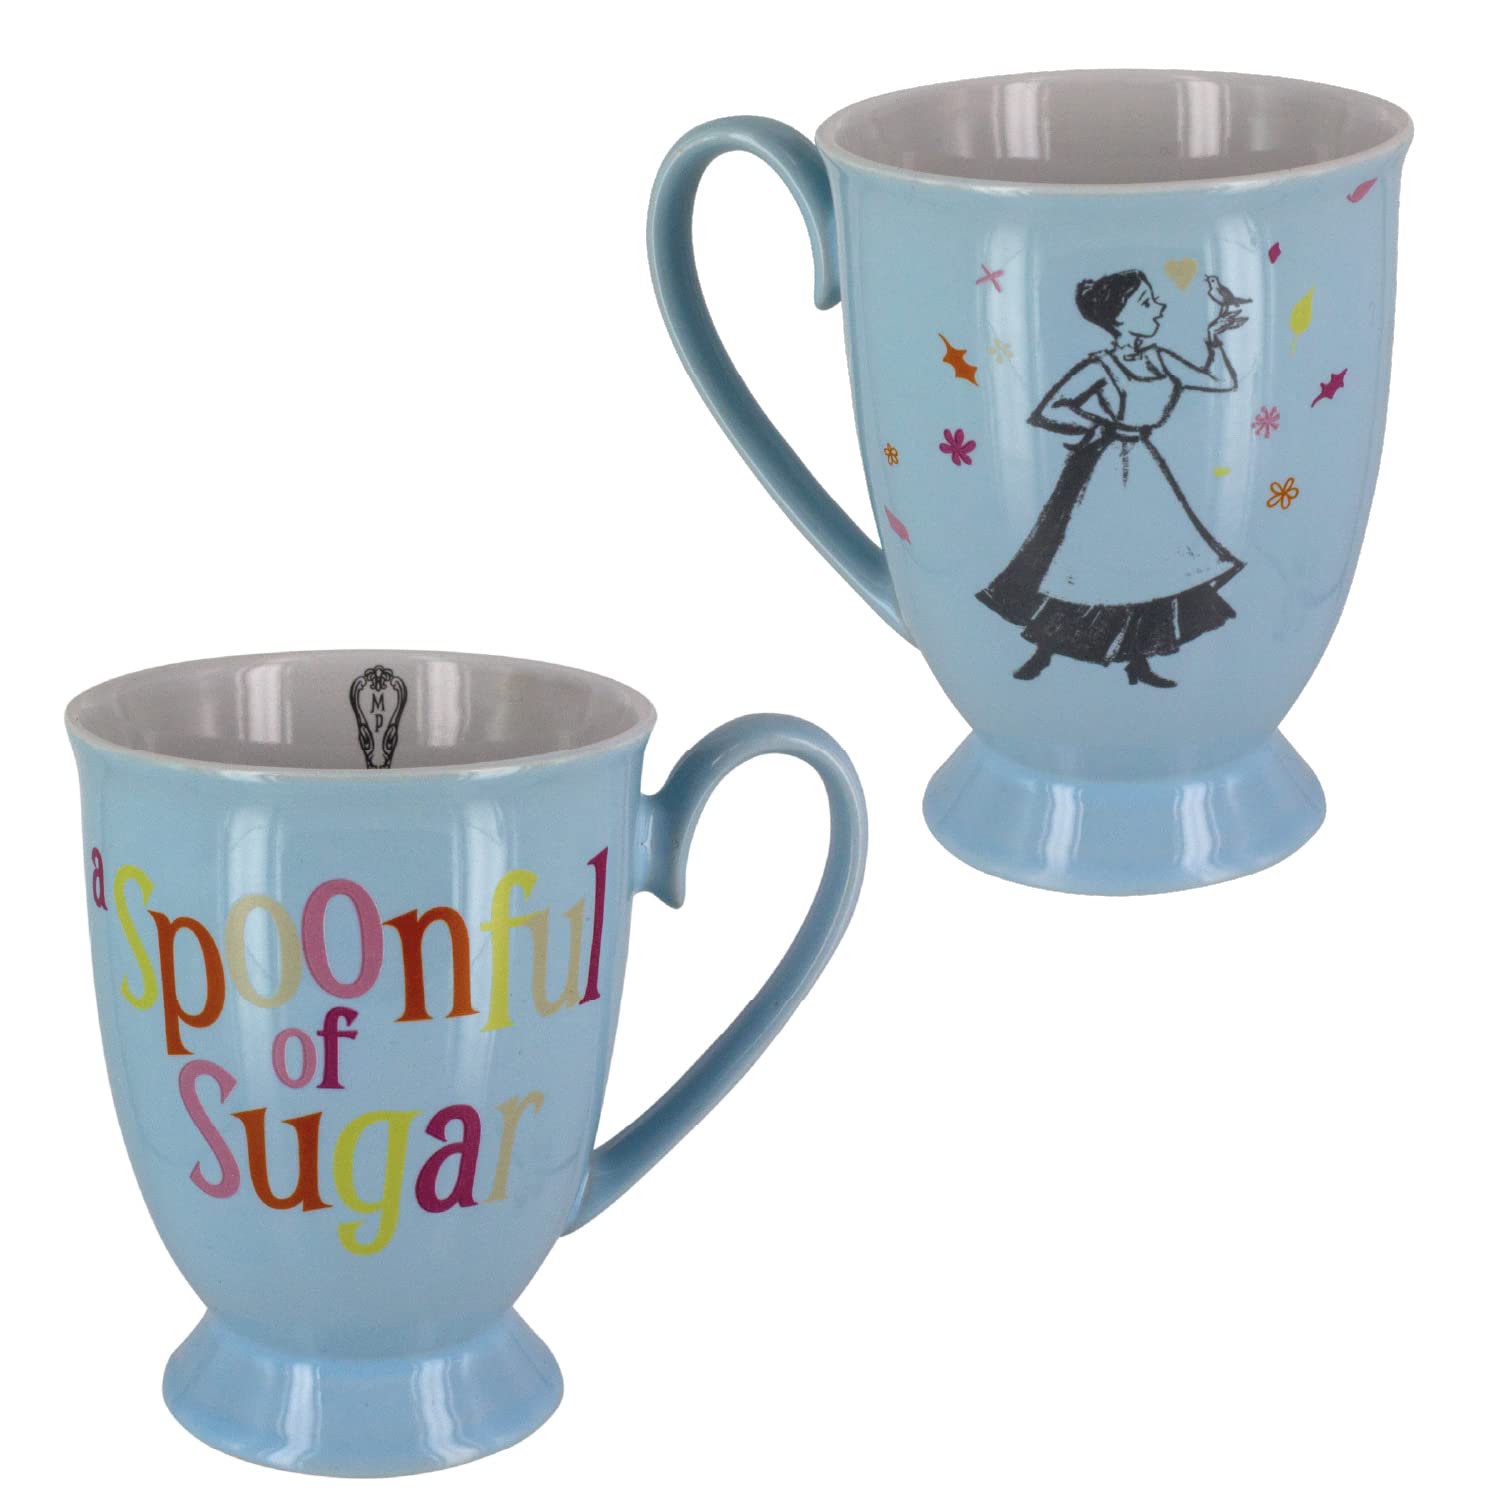 Add a Spoonful of Magic to Your Morning Routine with the Officially Licensed Paladone Mary Poppins Coffee Mug - Multi-Colour, 1 Count.